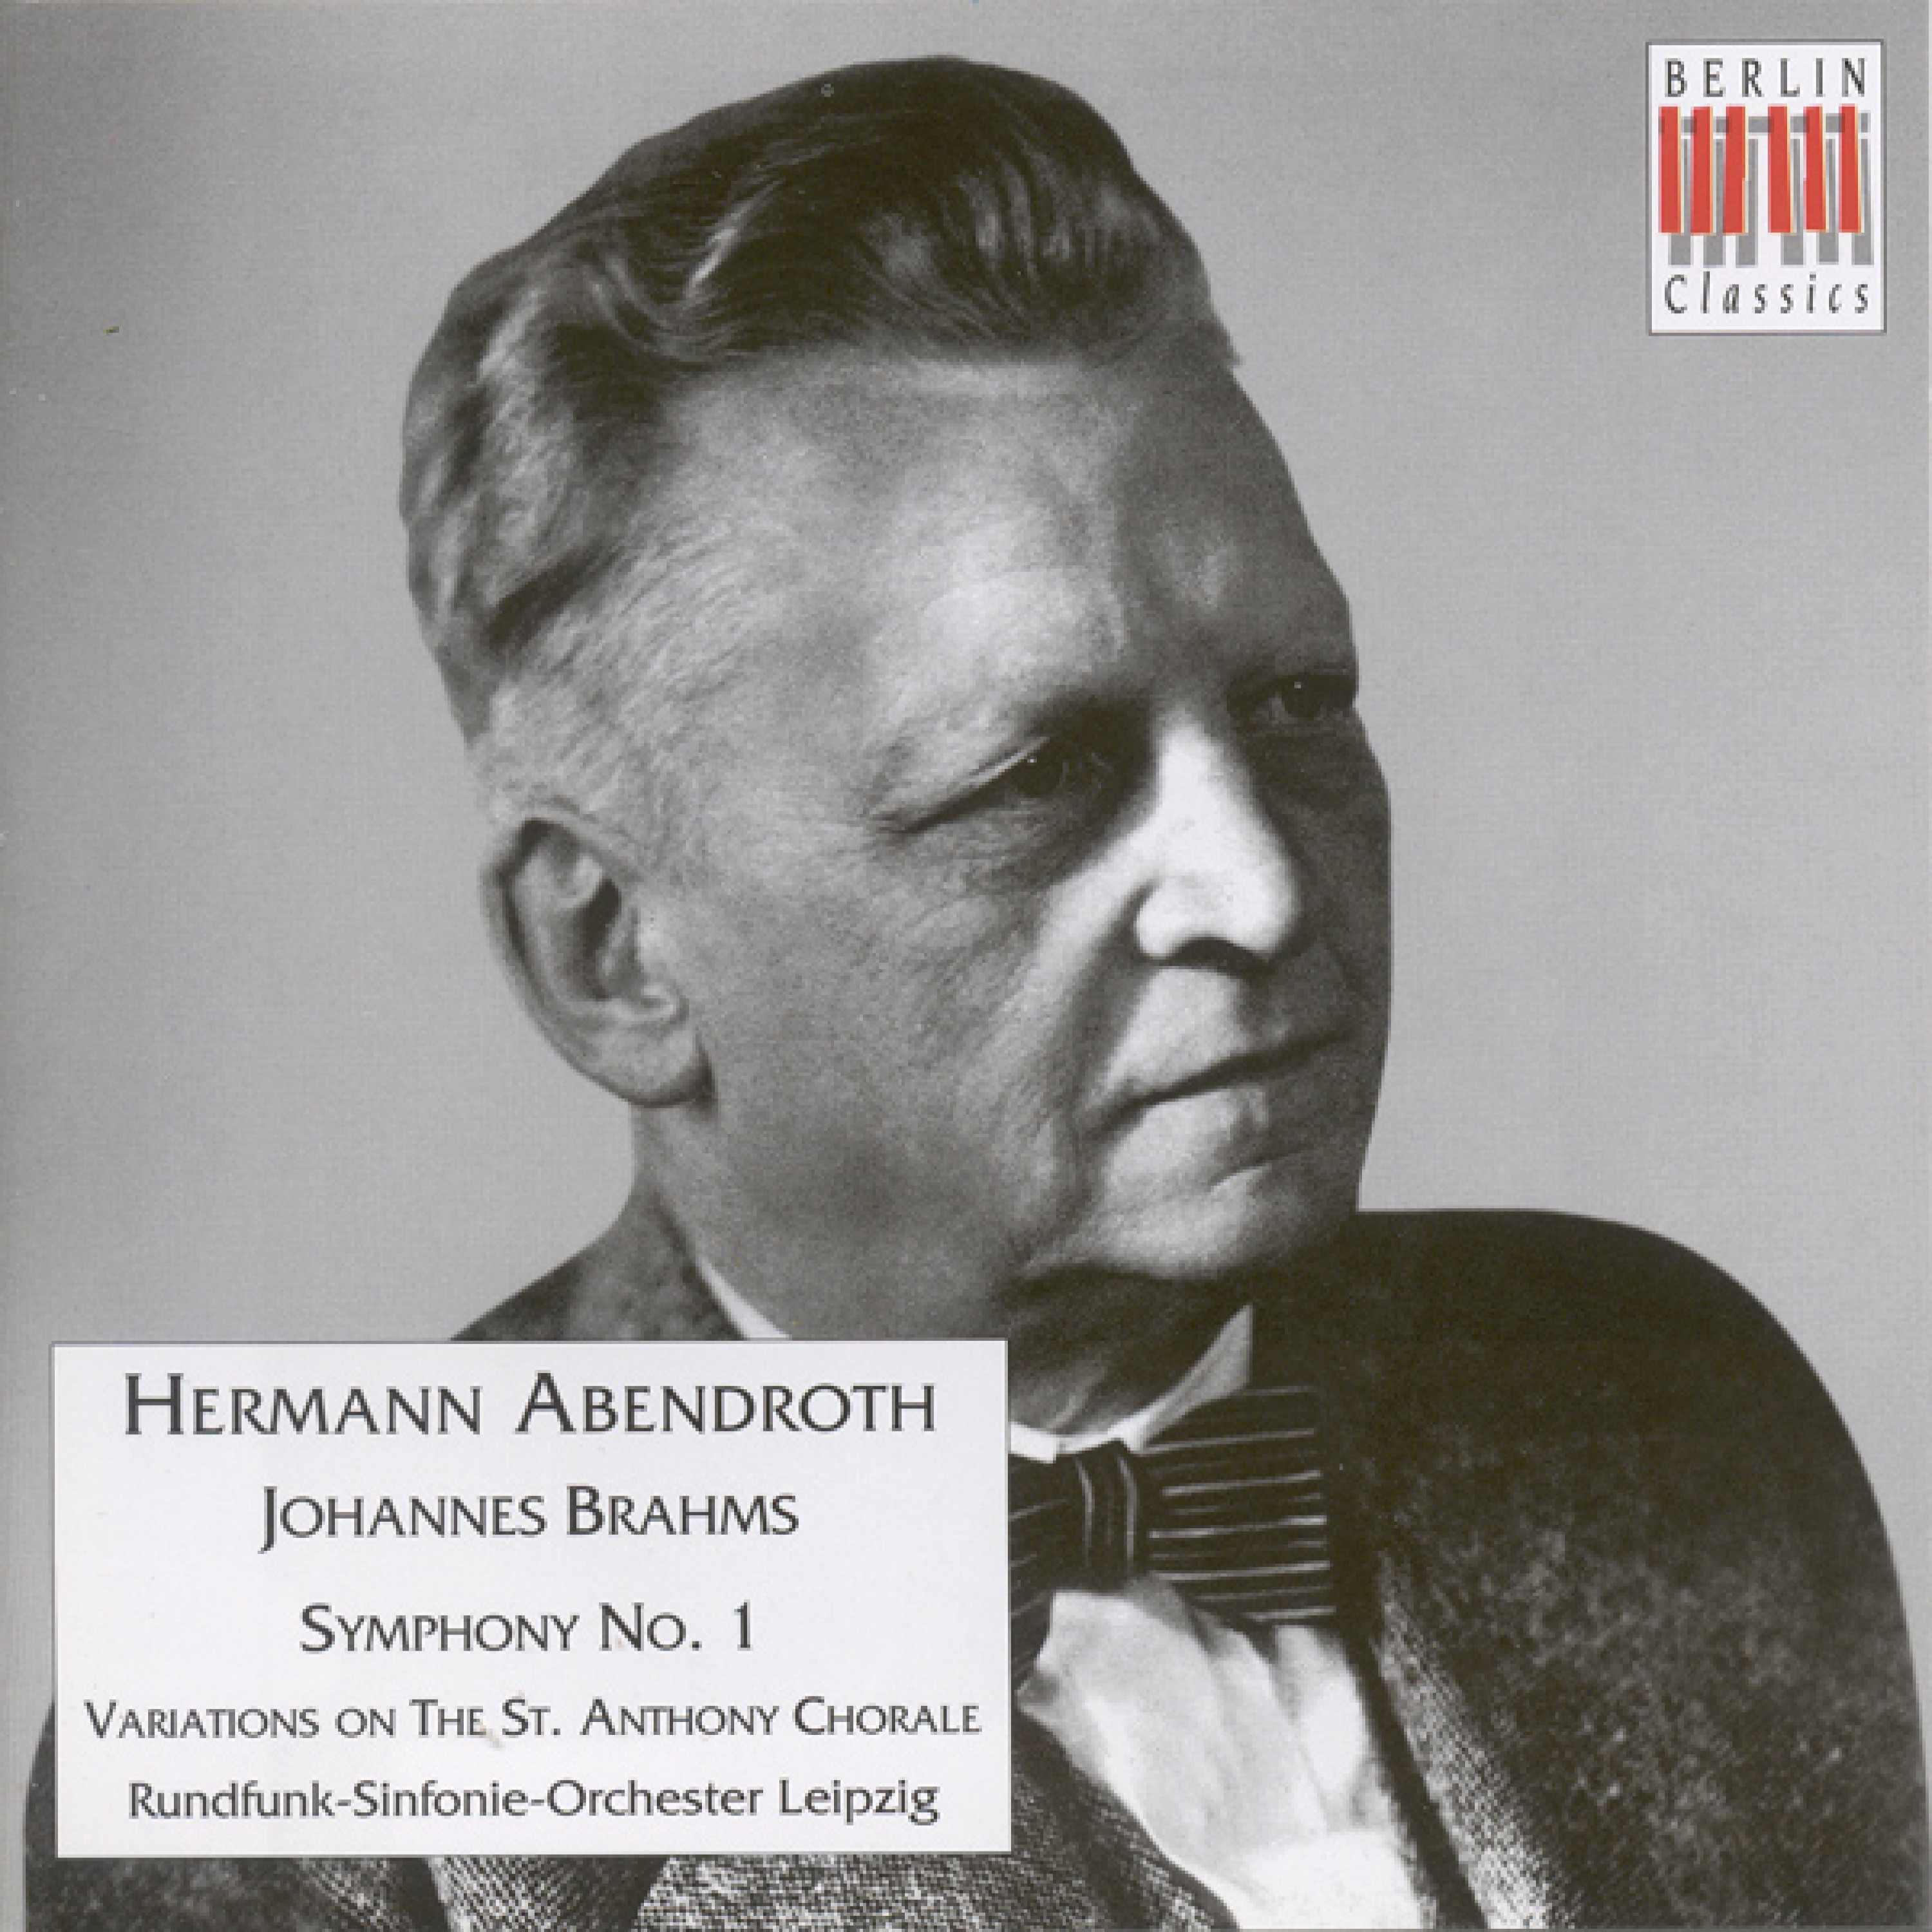 Variations on a Theme by Haydn, Op. 56a, "St. Anthony Variations": Variation 8: Poco presto